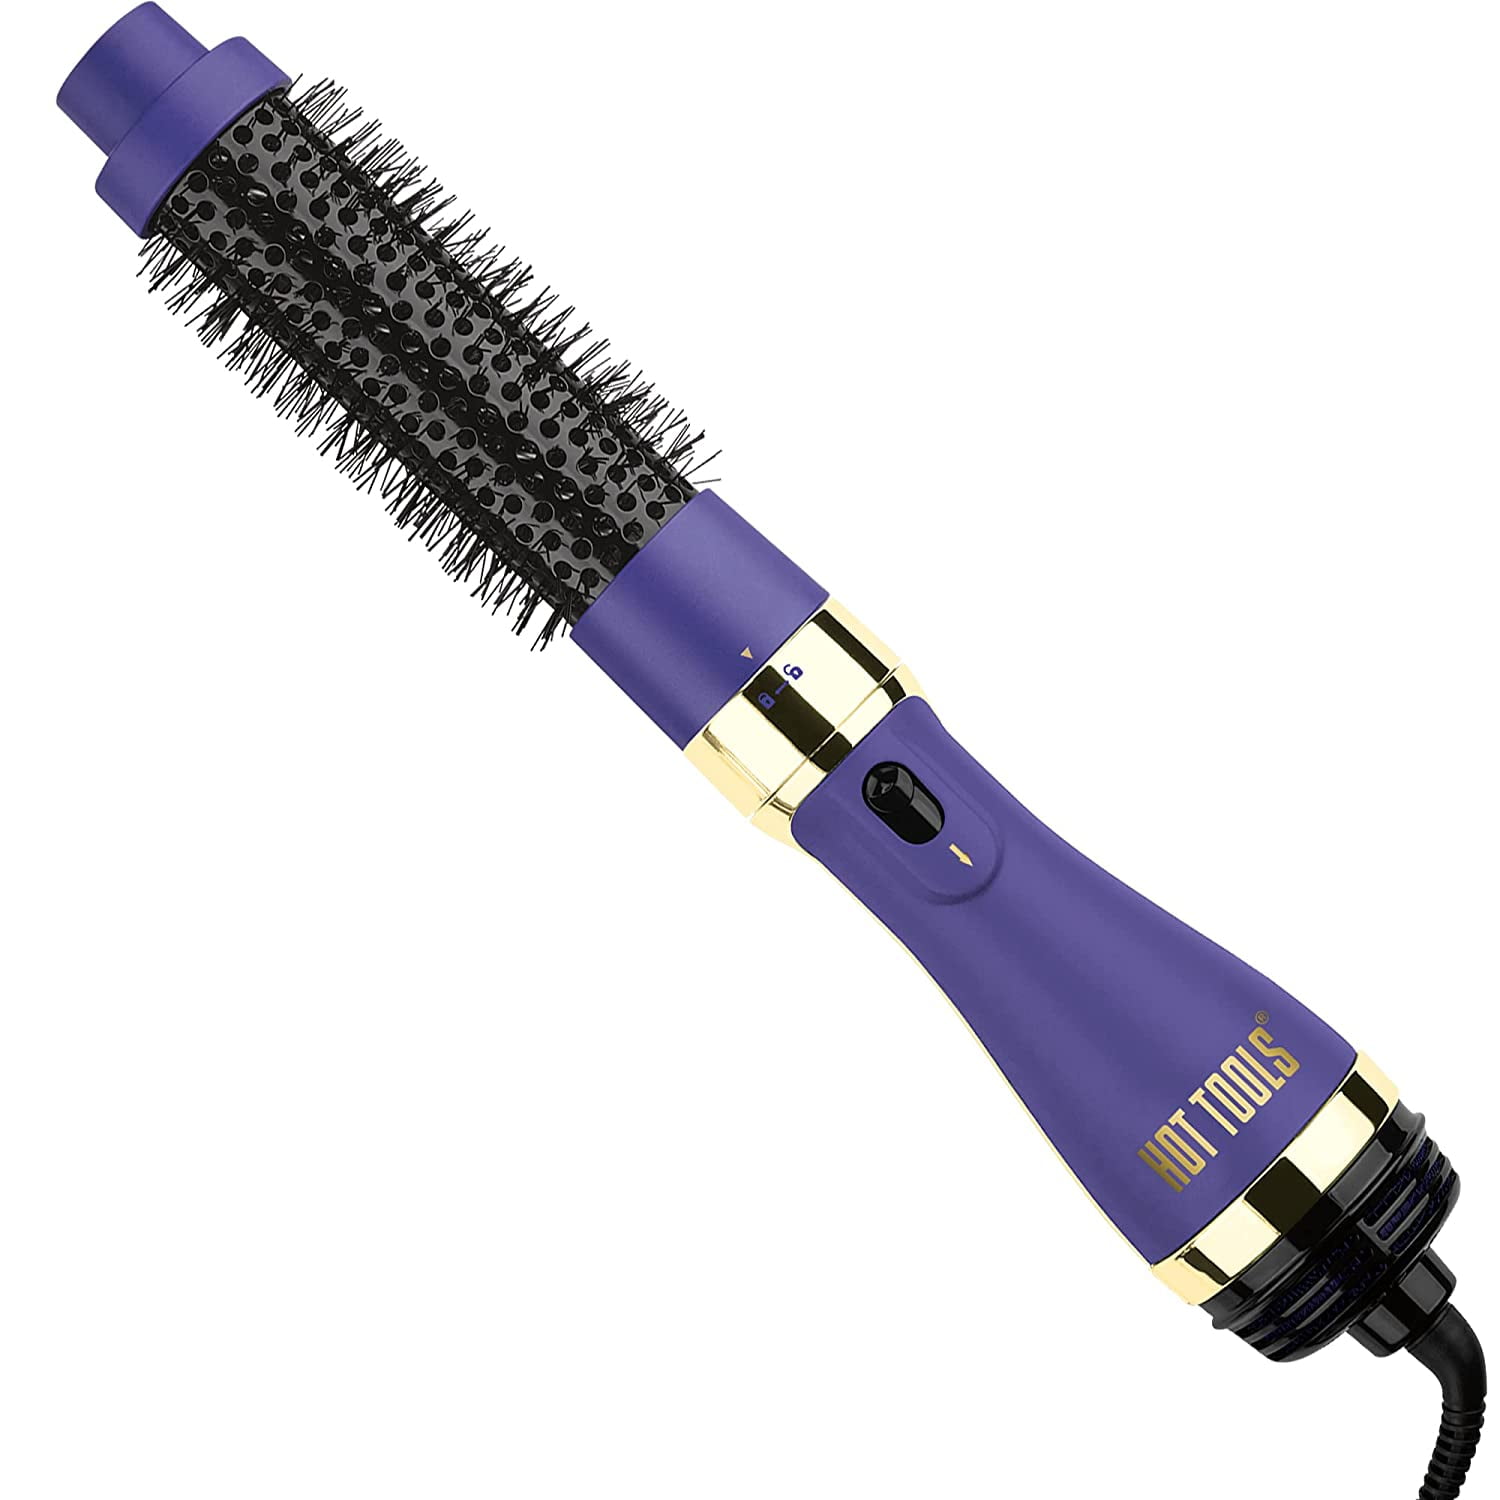 Hot Tools Pro Dry & | One Signature and Brush Detachable Step Dryer Volumizer Hair Style